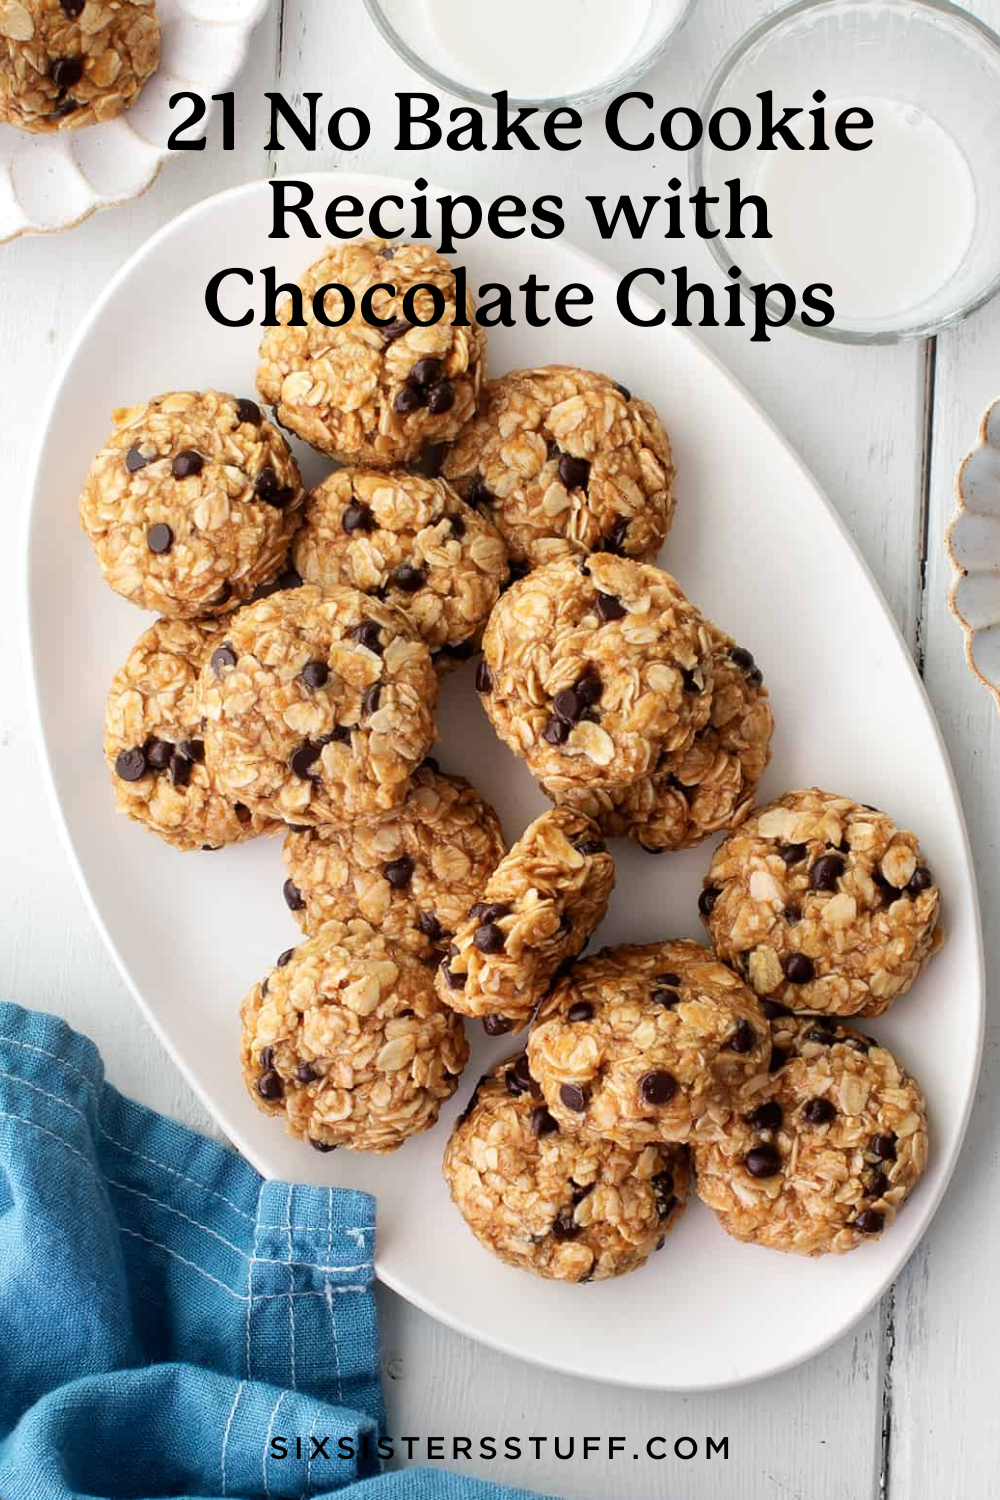 21 No Bake Cookie Recipes with Chocolate Chips